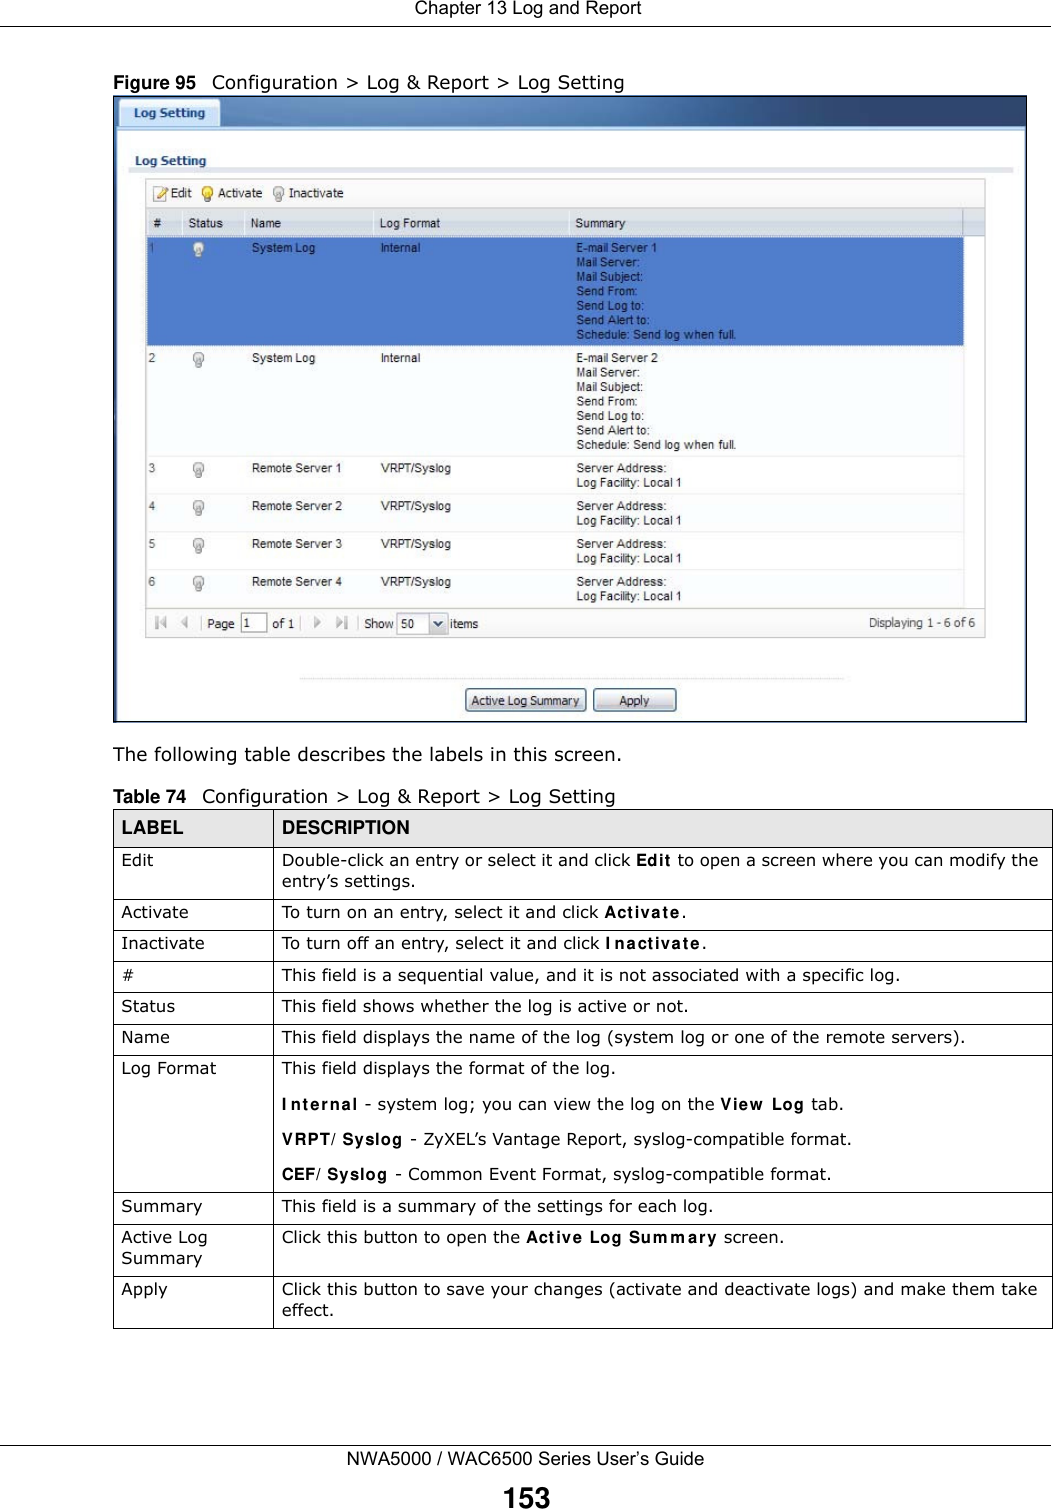  Chapter 13 Log and ReportNWA5000 / WAC6500 Series User’s Guide153Figure 95   Configuration &gt; Log &amp; Report &gt; Log SettingThe following table describes the labels in this screen. Table 74   Configuration &gt; Log &amp; Report &gt; Log SettingLABEL DESCRIPTIONEdit Double-click an entry or select it and click Edit to open a screen where you can modify the entry’s settings. Activate To turn on an entry, select it and click Act iv a t e.Inactivate To turn off an entry, select it and click I n a ct iva t e .# This field is a sequential value, and it is not associated with a specific log.Status This field shows whether the log is active or not.Name This field displays the name of the log (system log or one of the remote servers).Log Format This field displays the format of the log. I n t ern al - system log; you can view the log on the View  Log tab.VRPT/ Syslog - ZyXEL’s Vantage Report, syslog-compatible format.CEF/ Sy slog - Common Event Format, syslog-compatible format.Summary This field is a summary of the settings for each log.Active Log SummaryClick this button to open the Active  Log Sum m a r y screen.Apply Click this button to save your changes (activate and deactivate logs) and make them take effect.